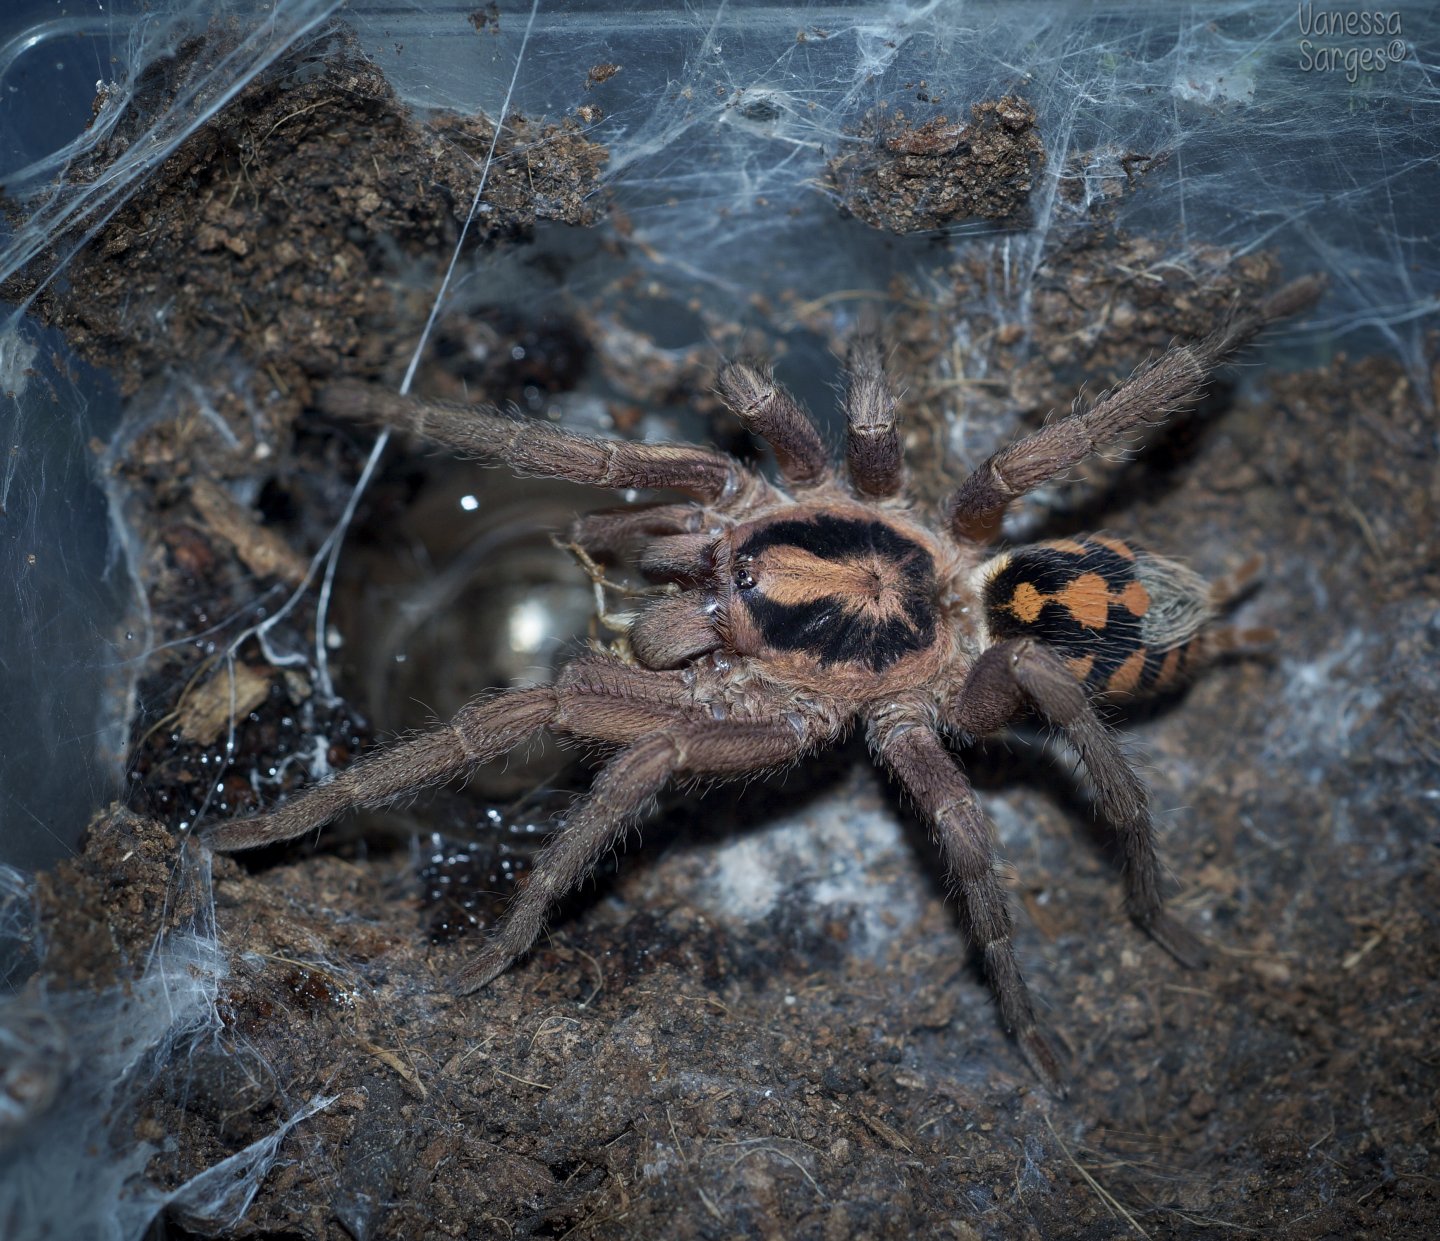 Hapalopus sp. Colombia Large Mature Male RIP ♥